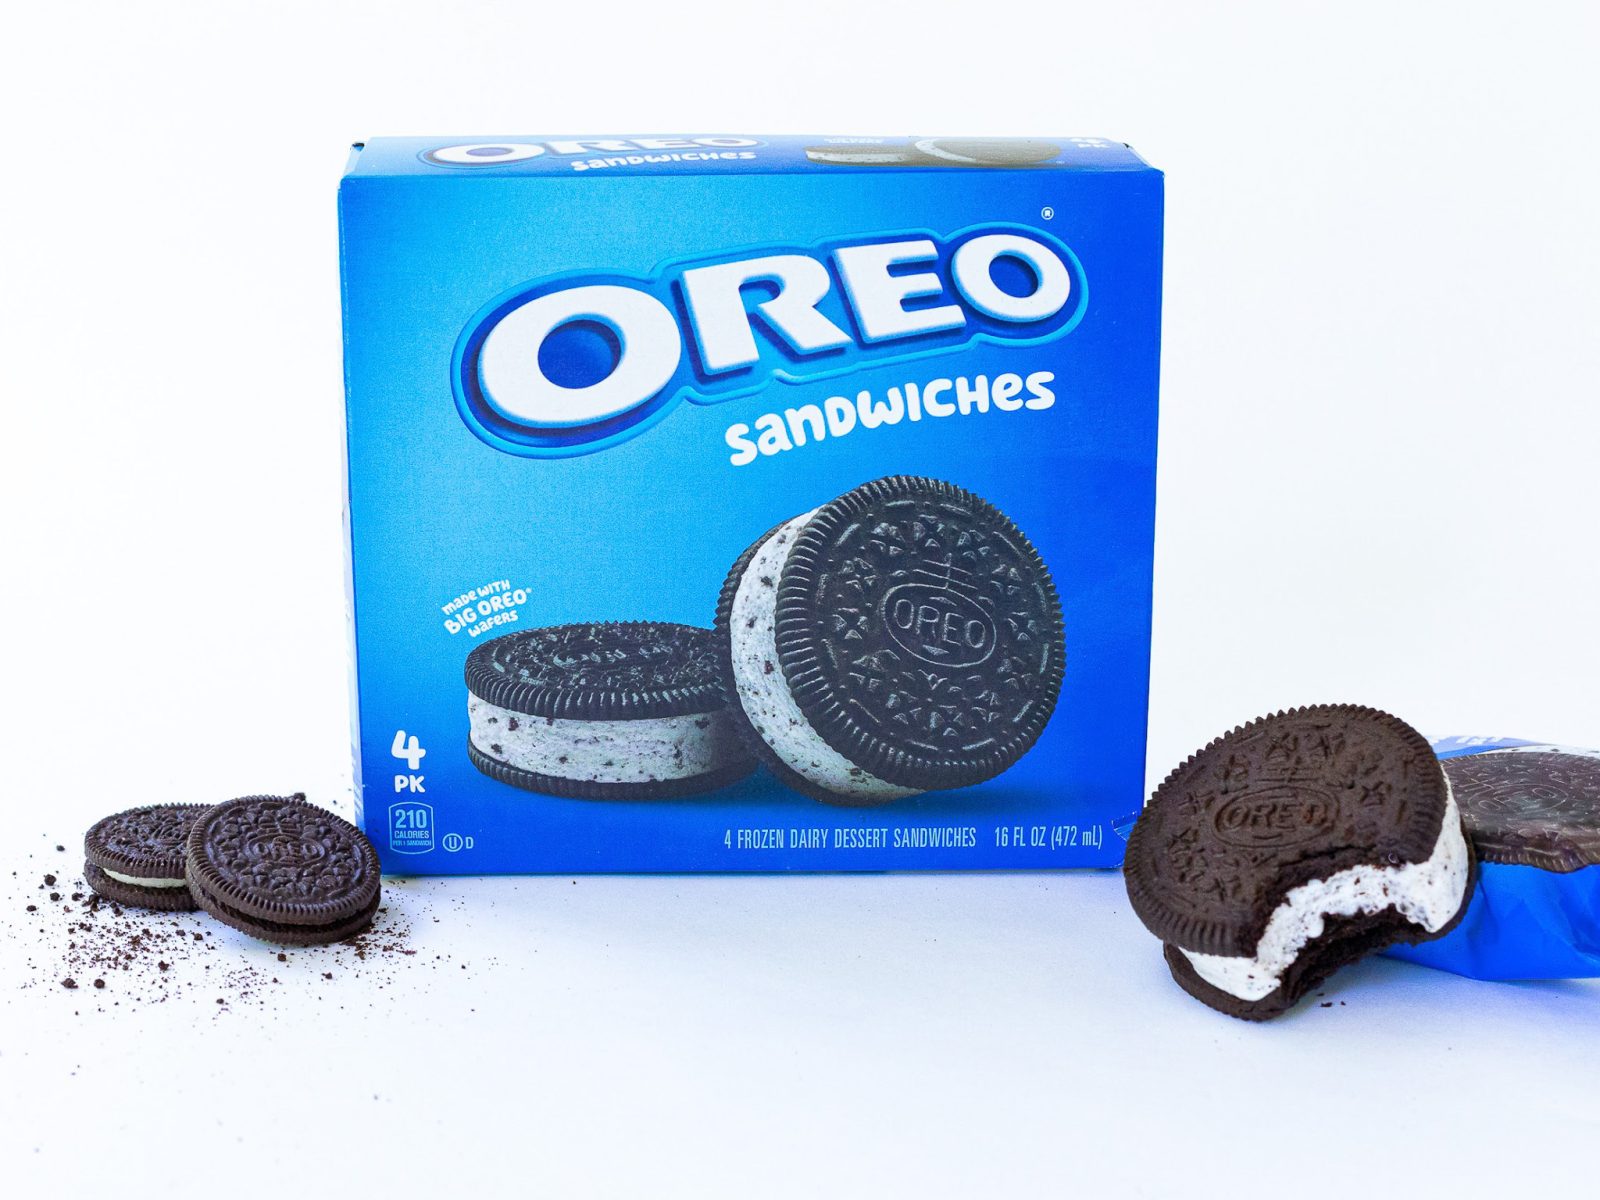 Get Oreo Ice Cream Sandwiches Just For Just $1 At Kroger (Regular Price $5.99)